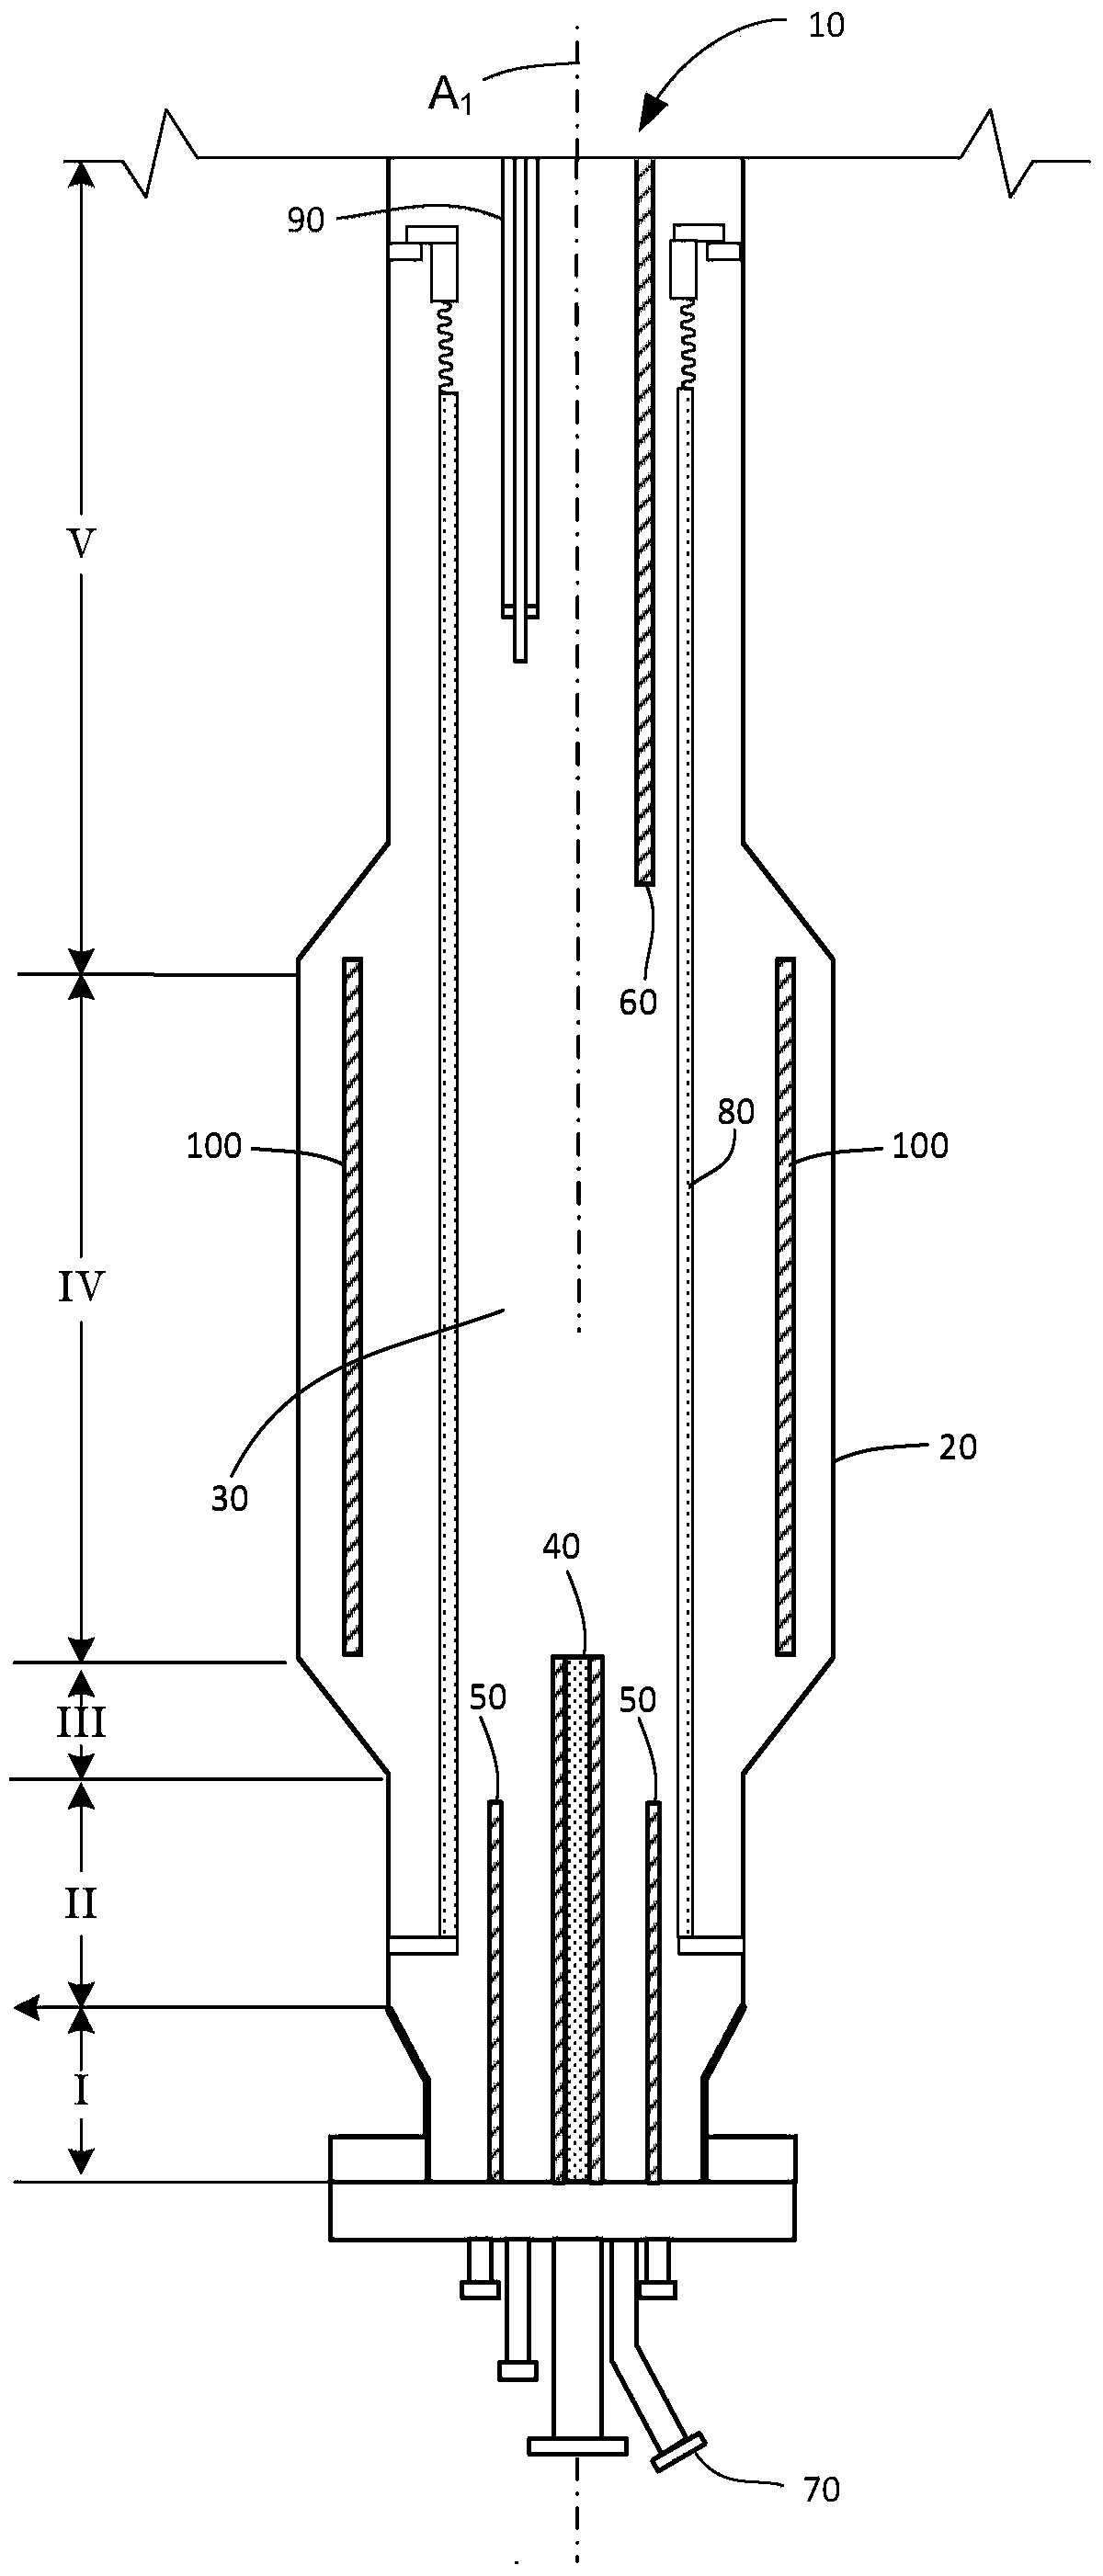 Joint Design of Segmented Silicon Carbide Lining in Fluidized Bed Reactor